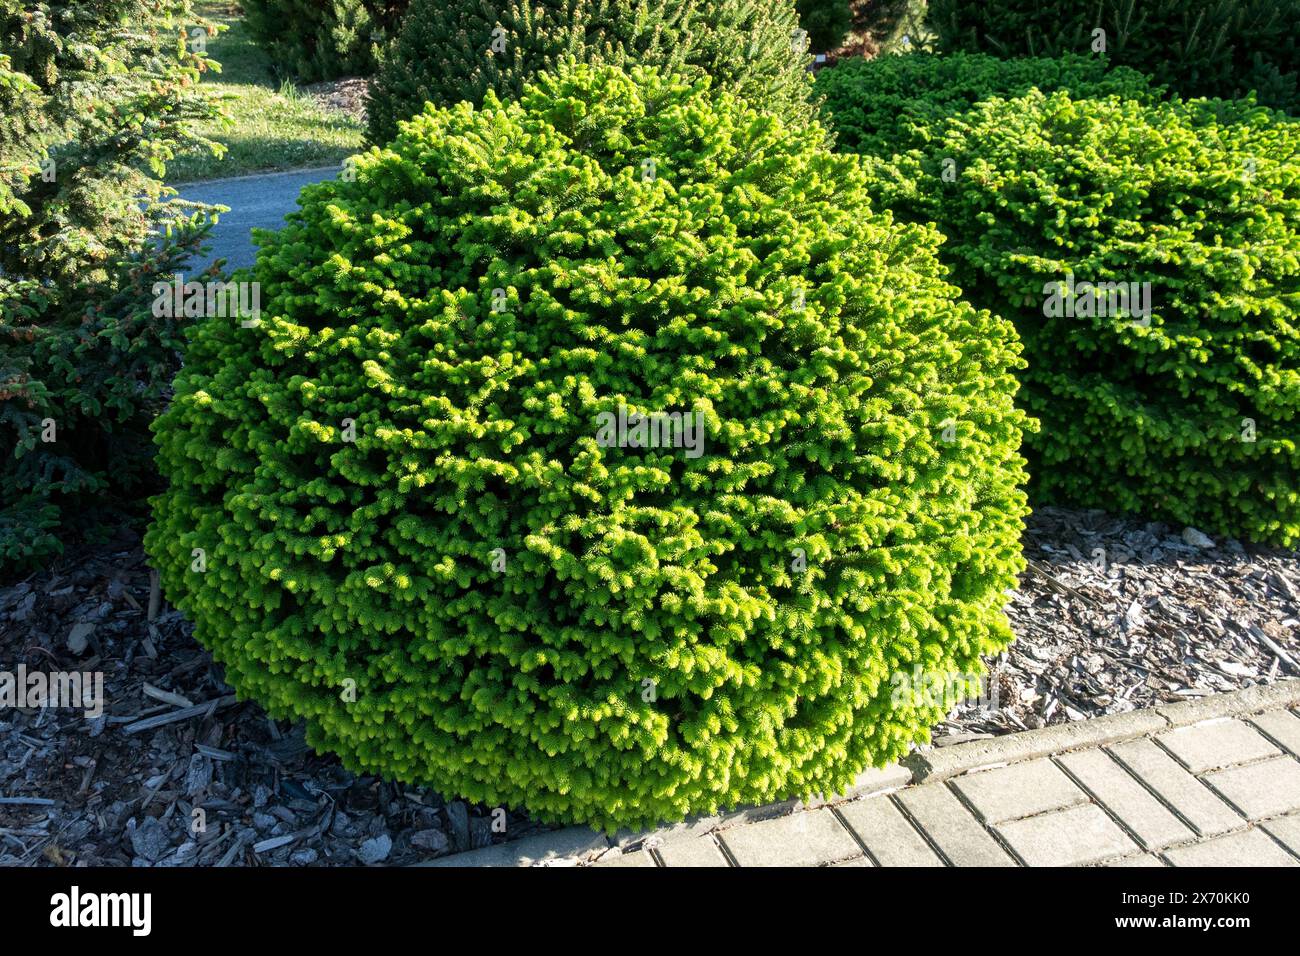 Norway spruce, Picea abies 'Nidiformis' Spherical Shape Dense, Small Plant Conifer Stock Photo